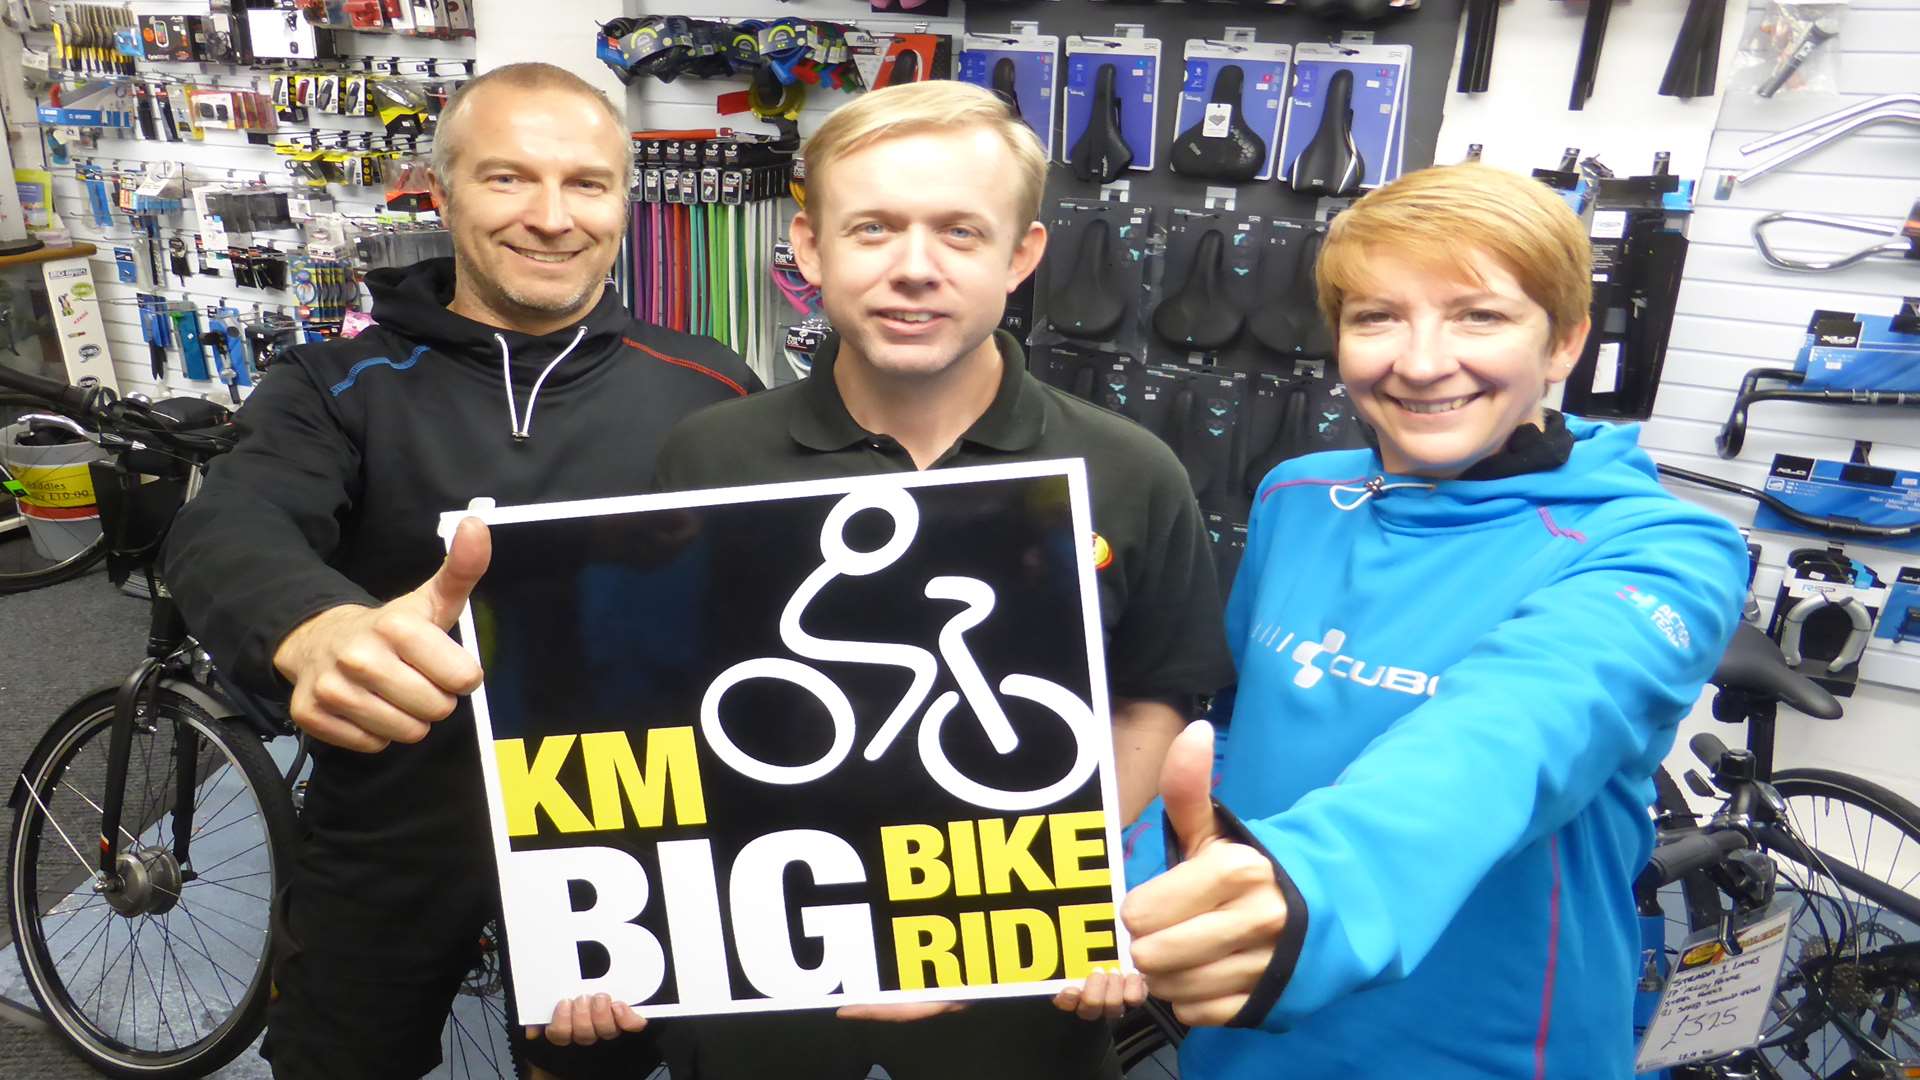 Andy Croucher, Martin Hayes, and Michele Newing from Locks of Sandwich Cycles are supporting the KM Big Bike Ride 2018.